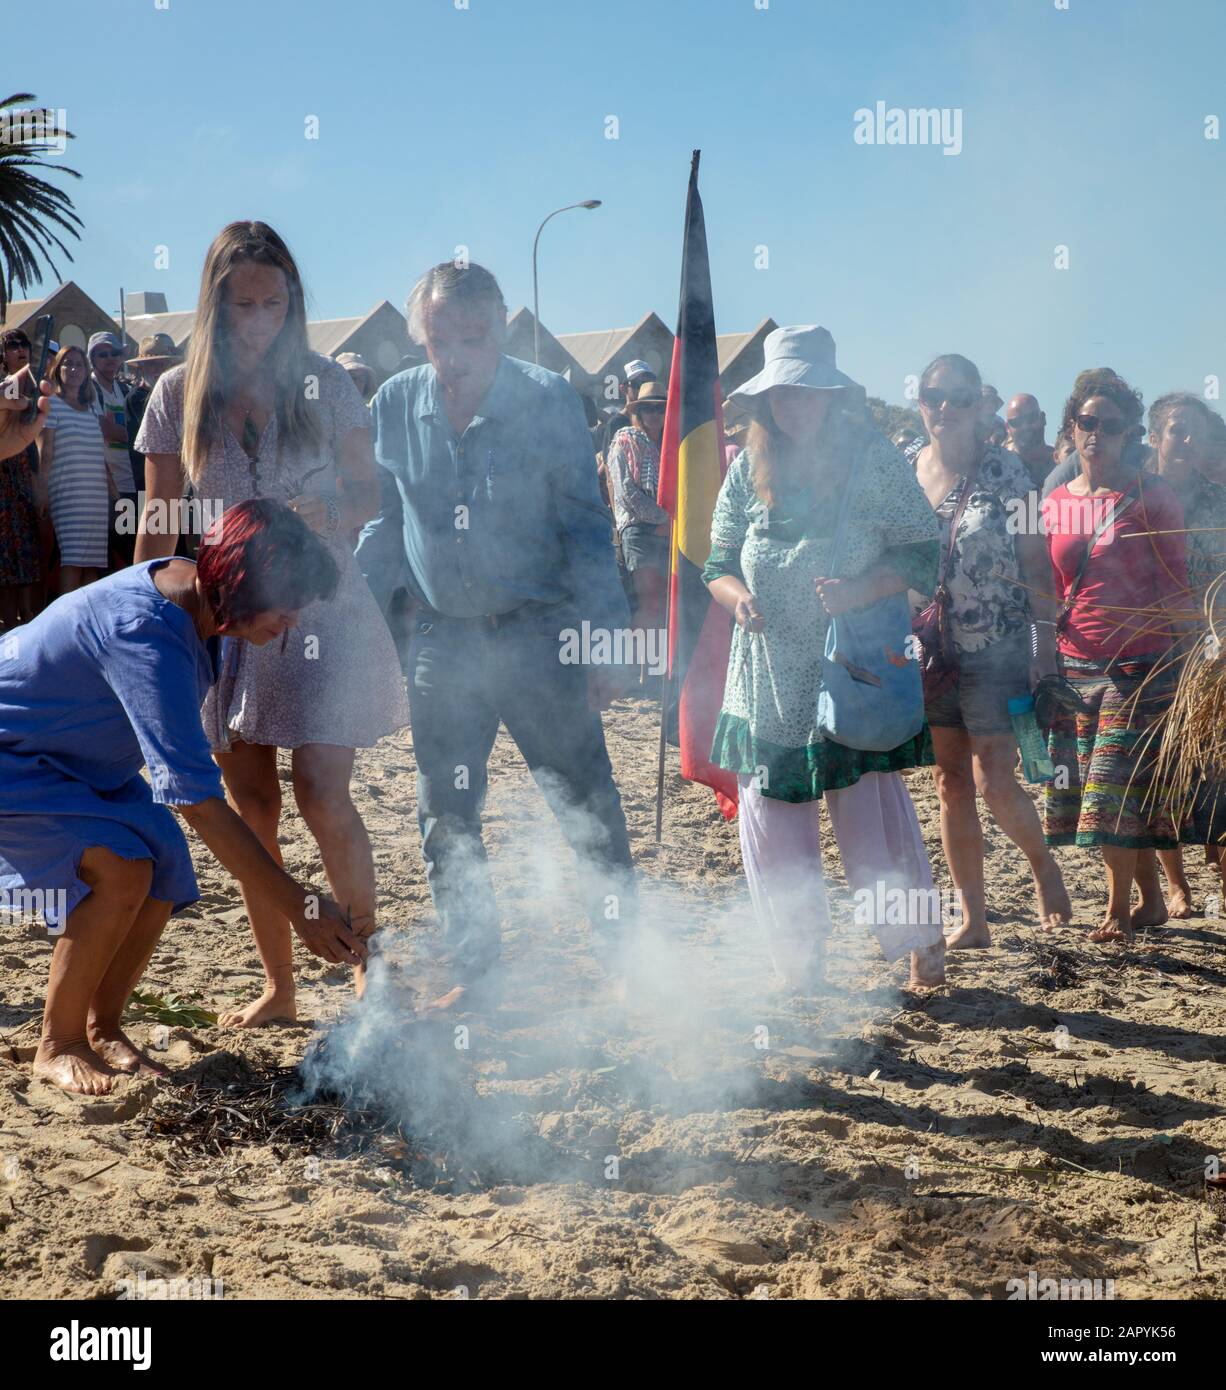 Fremantle, Western Australia. 25th January 2020. People from Fremantle, Perth, Western come together, on Bathers Beach and around the Kidigo Art House, celebrating Aboriginal culture, music and as an alternative